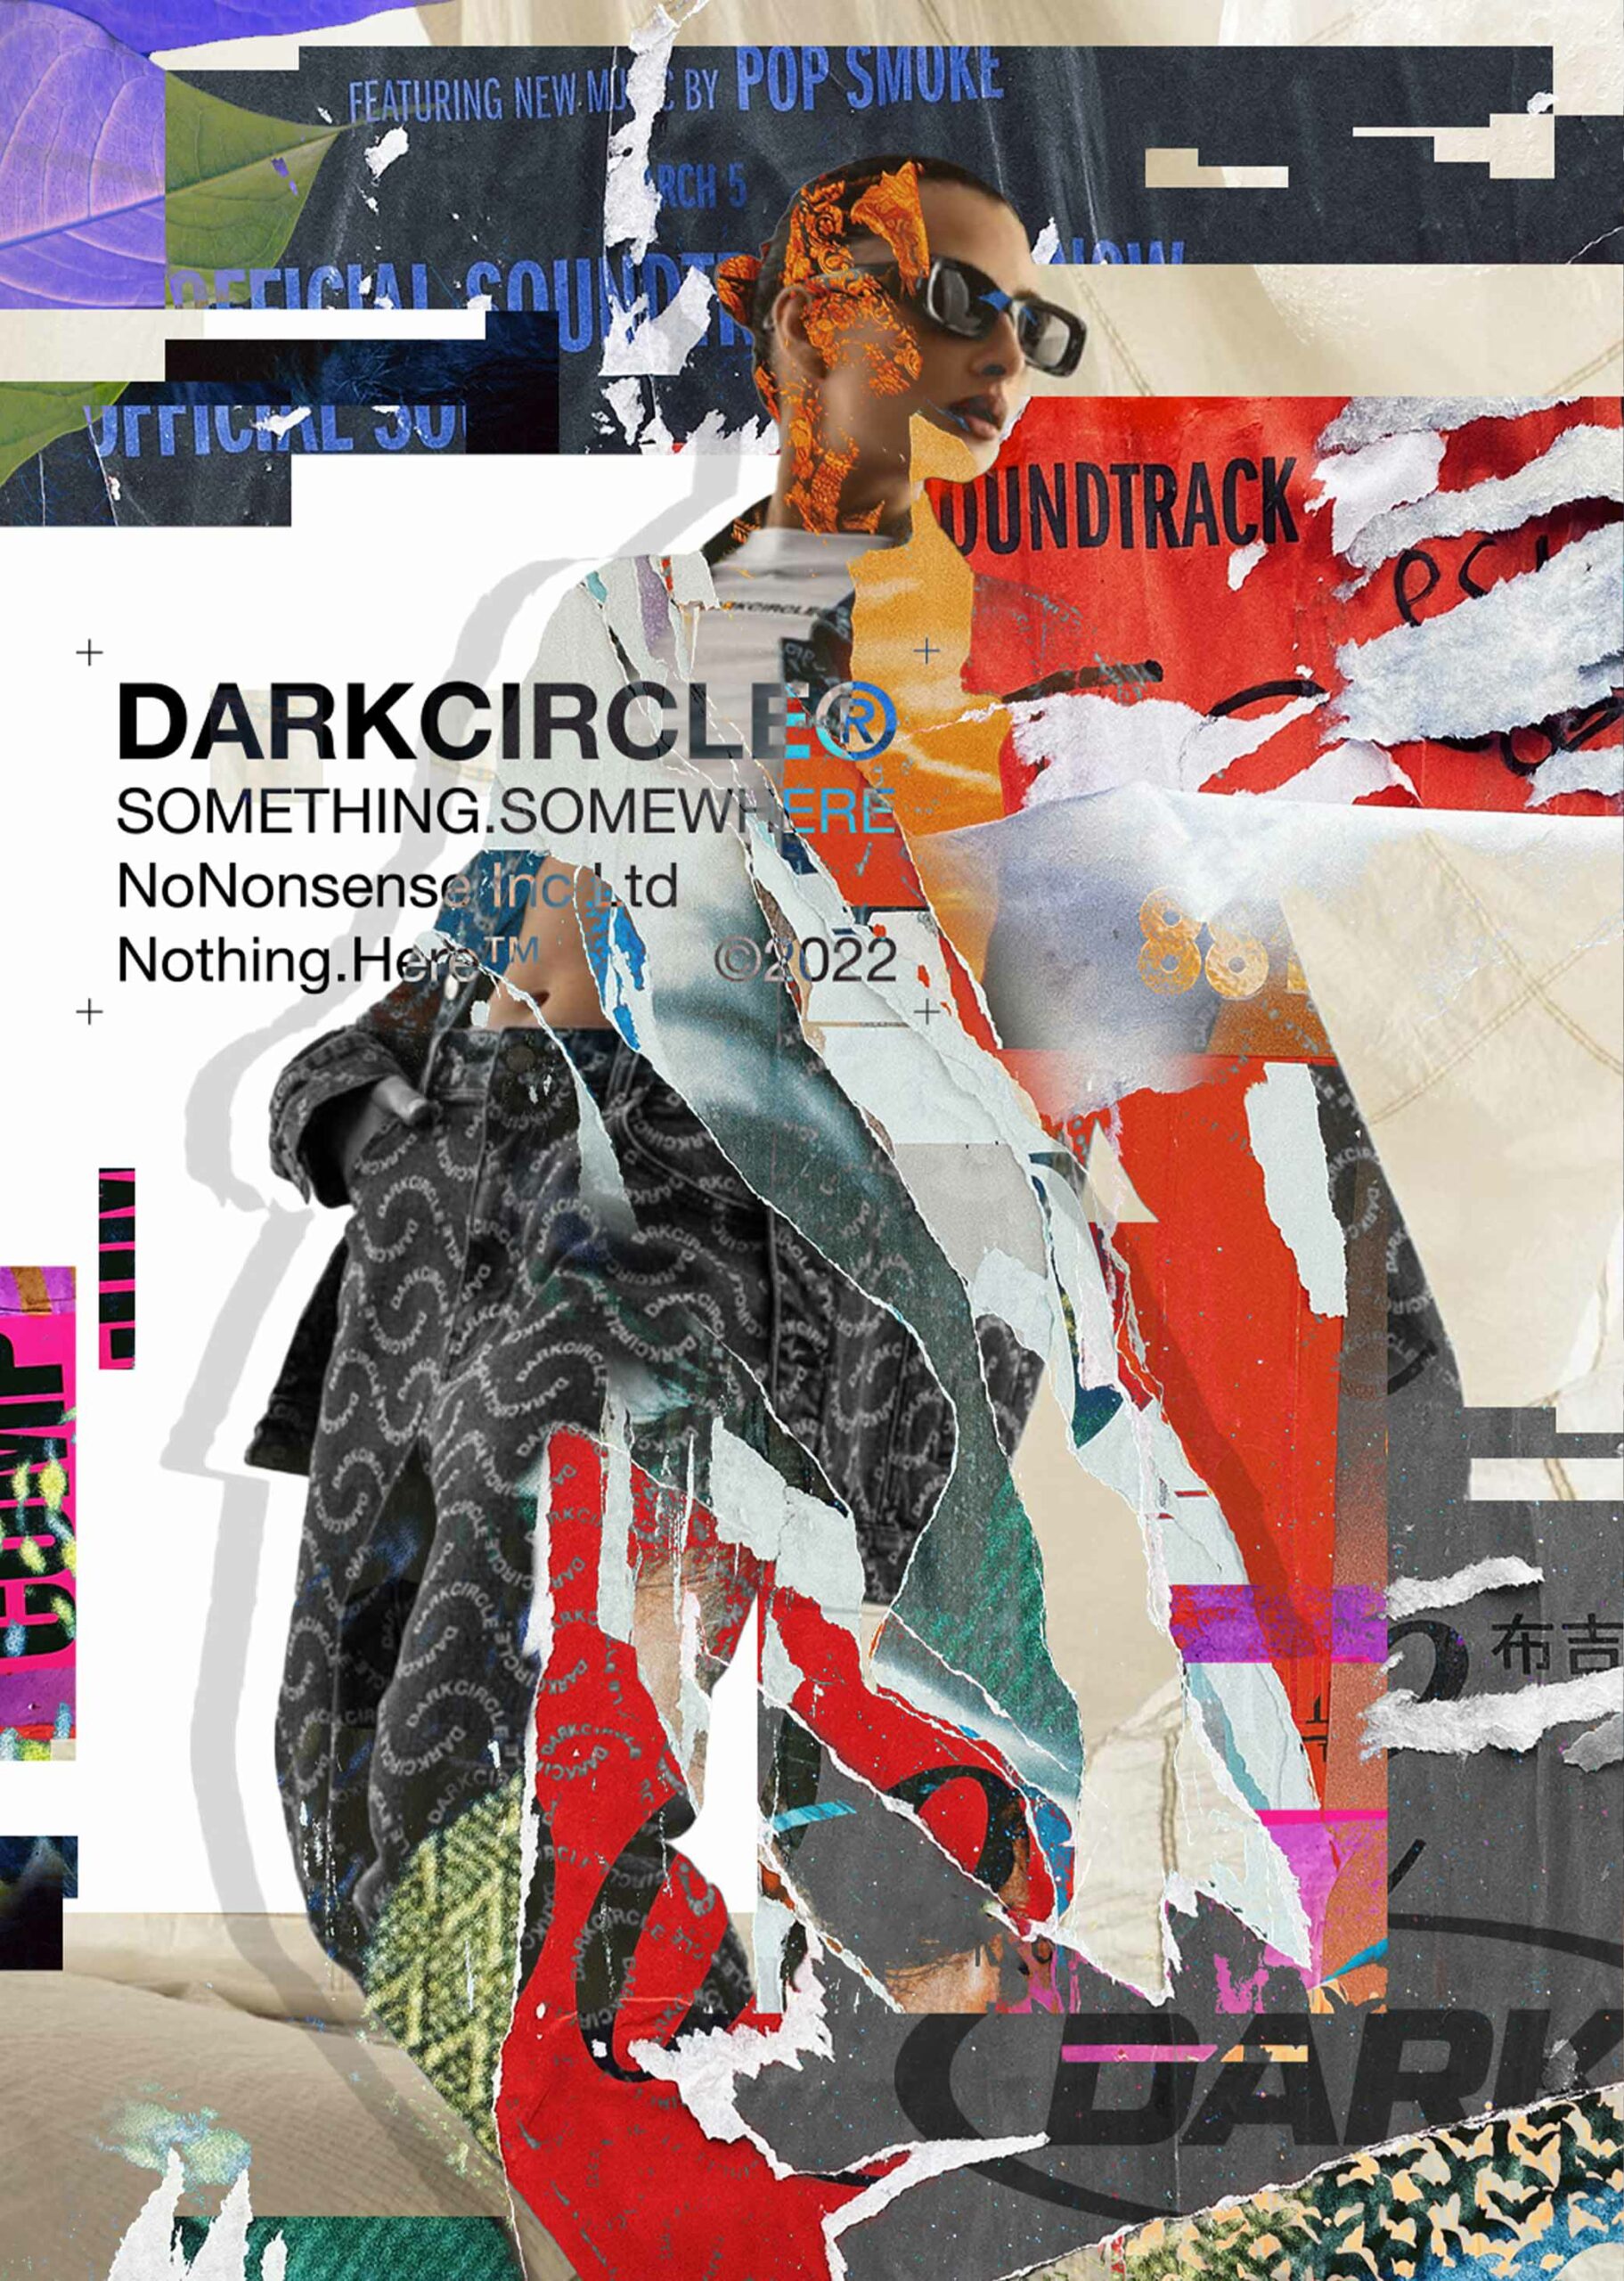 Creative experimental poster design for Dark Circle using a ripped paper montage style